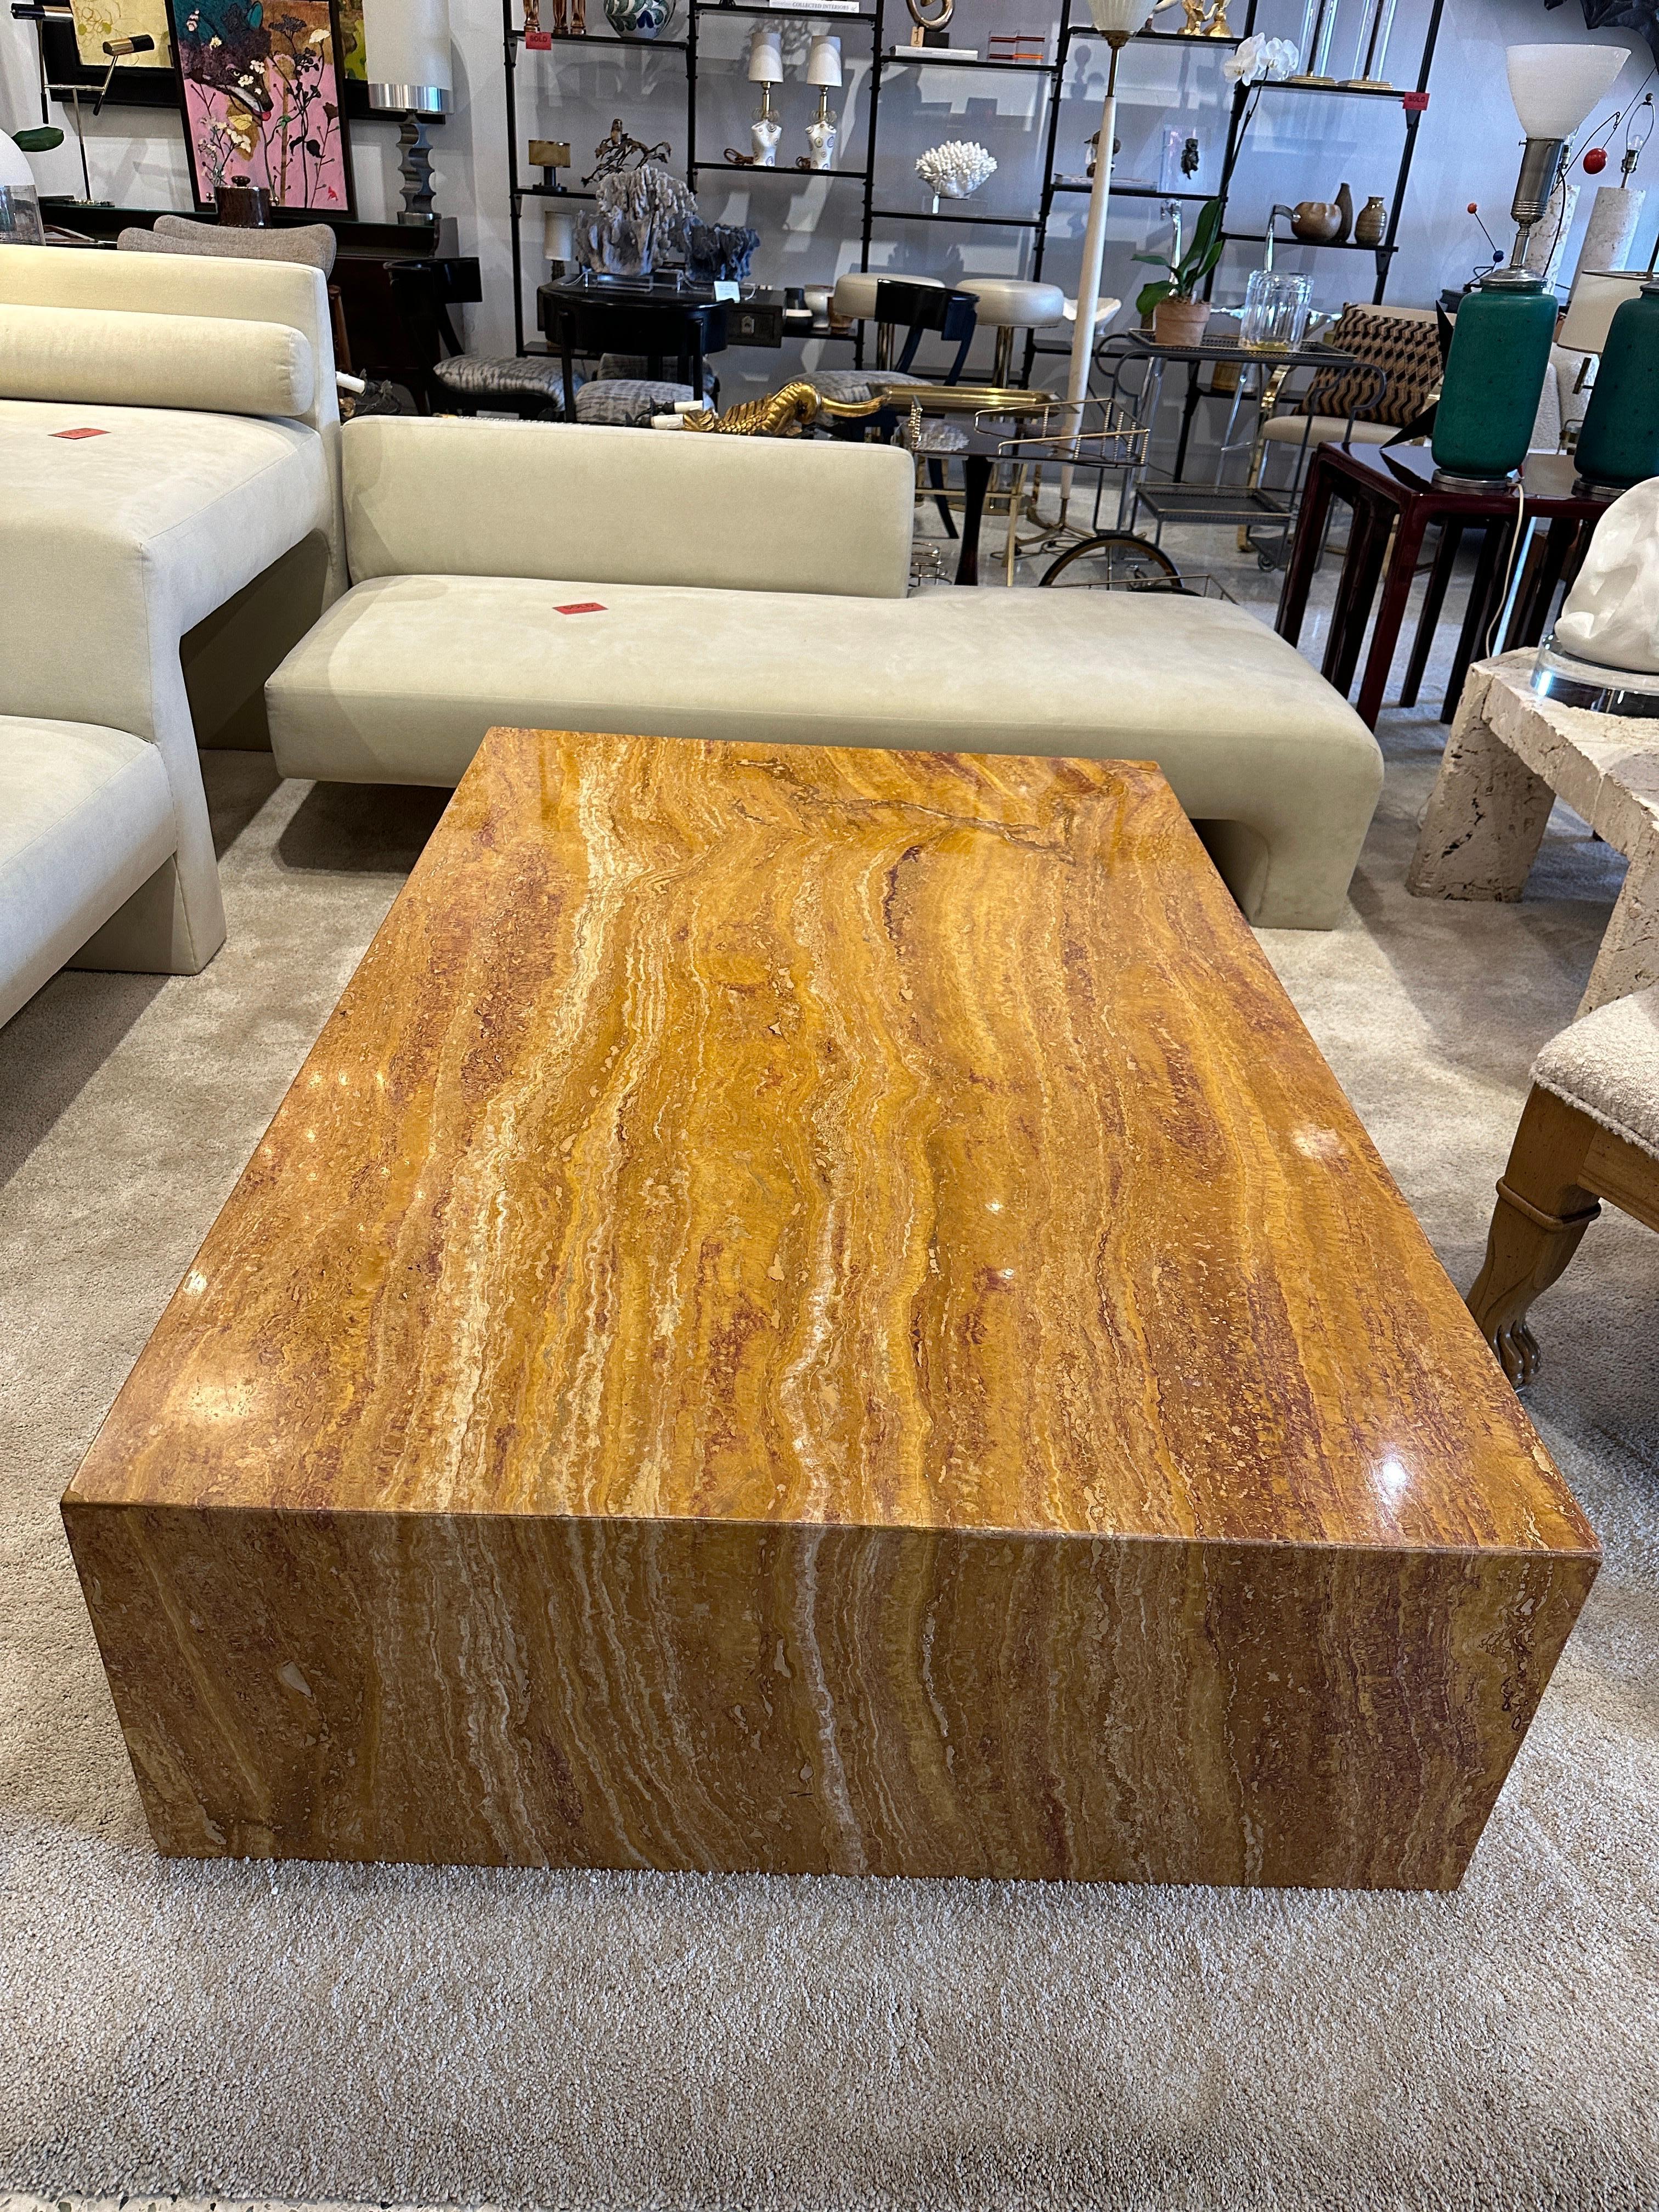 This is an OUTSTANDING oversized waterfall style marble coffee table.  It is solid and in wonderful condition.  Ready to place in your home!

The Marble Giallo Siena is one of the most beautiful, prestigious and detailed marbles that are mined in